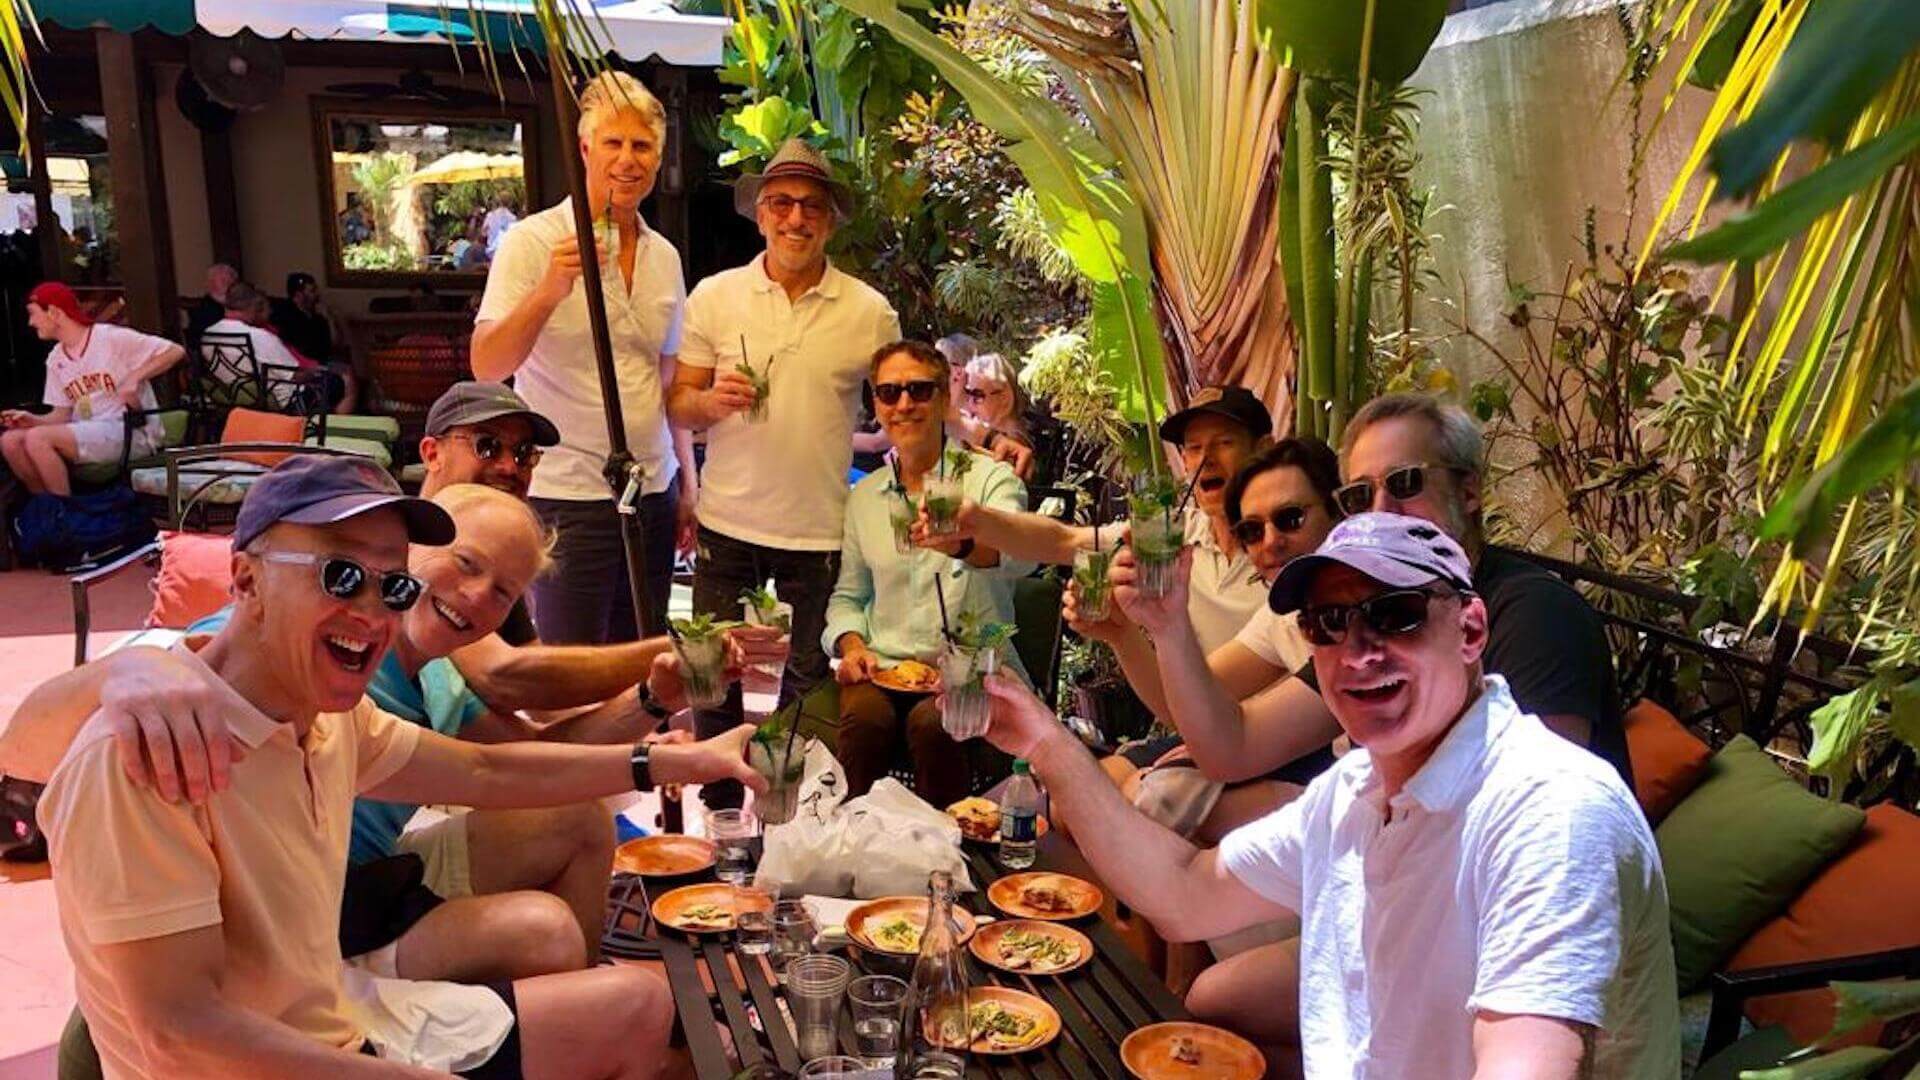 A group of people enjoying drinks and food at an outdoor restaurant setting.